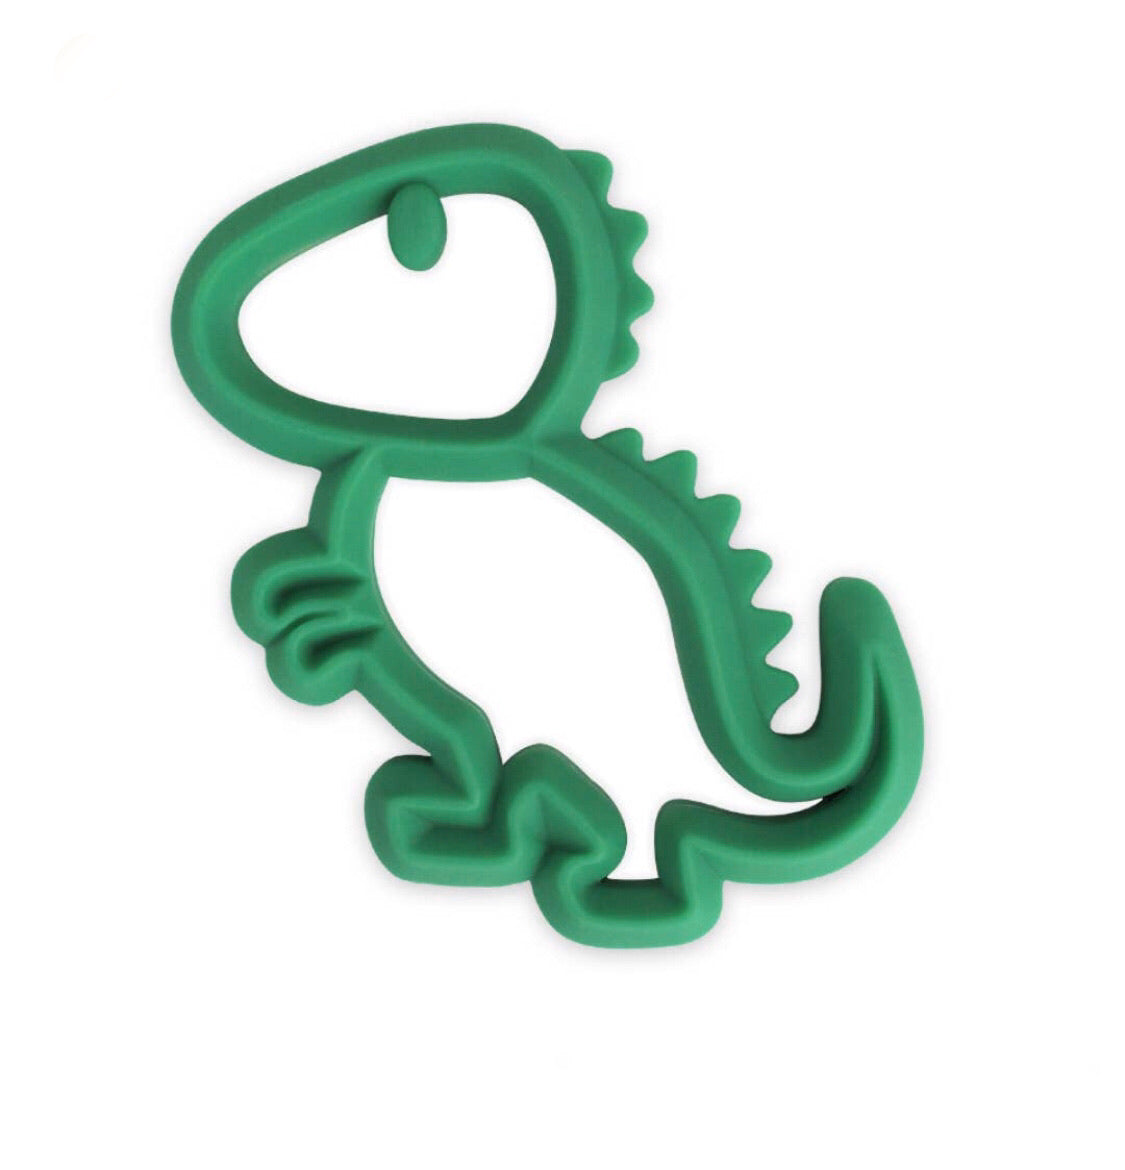 Dinosaur Green - Sore gums are no match for the Itzy Ritzy Silicone Teether! Itzy Ritzy teethers are safe on baby’s gums, and the open design makes them easy for small hands to grasp.  These teethers are made of non-toxic food grade silicone and have texture on one side to massage sore gums and provide relief to emerging teeth. The texture also helps your baby discover and explore new senses, so go ahead and chew on this